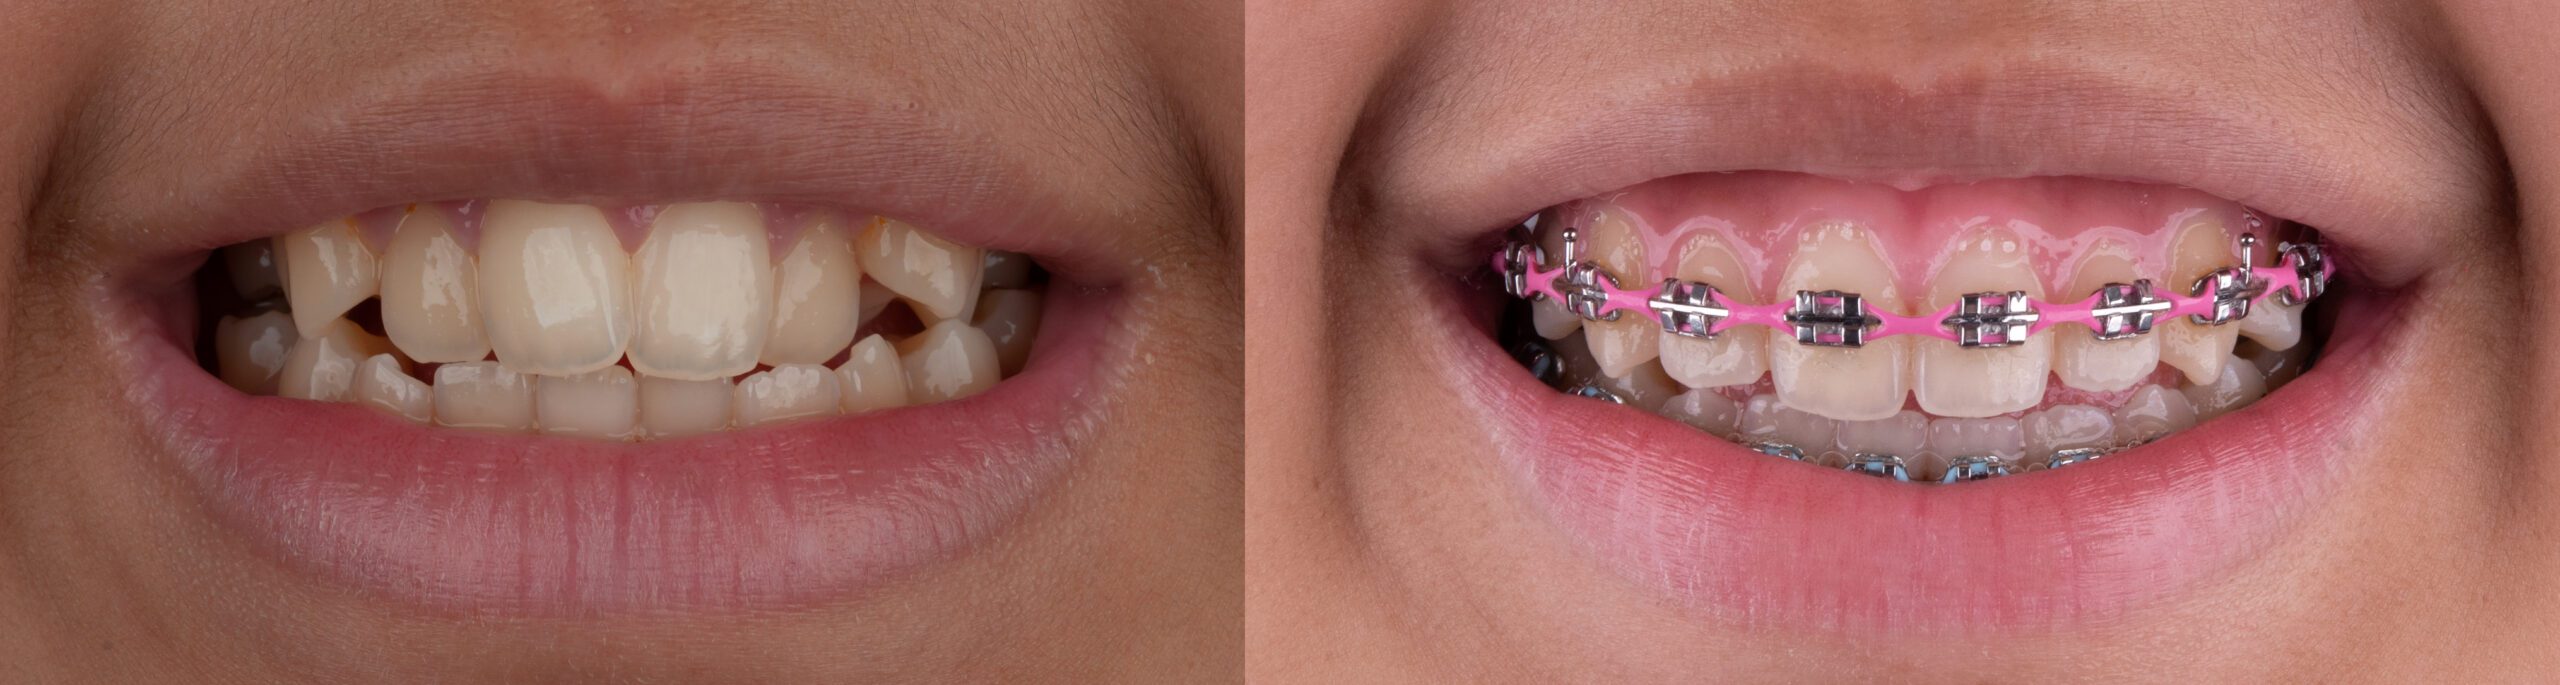 Dental Braces Before and After Photo